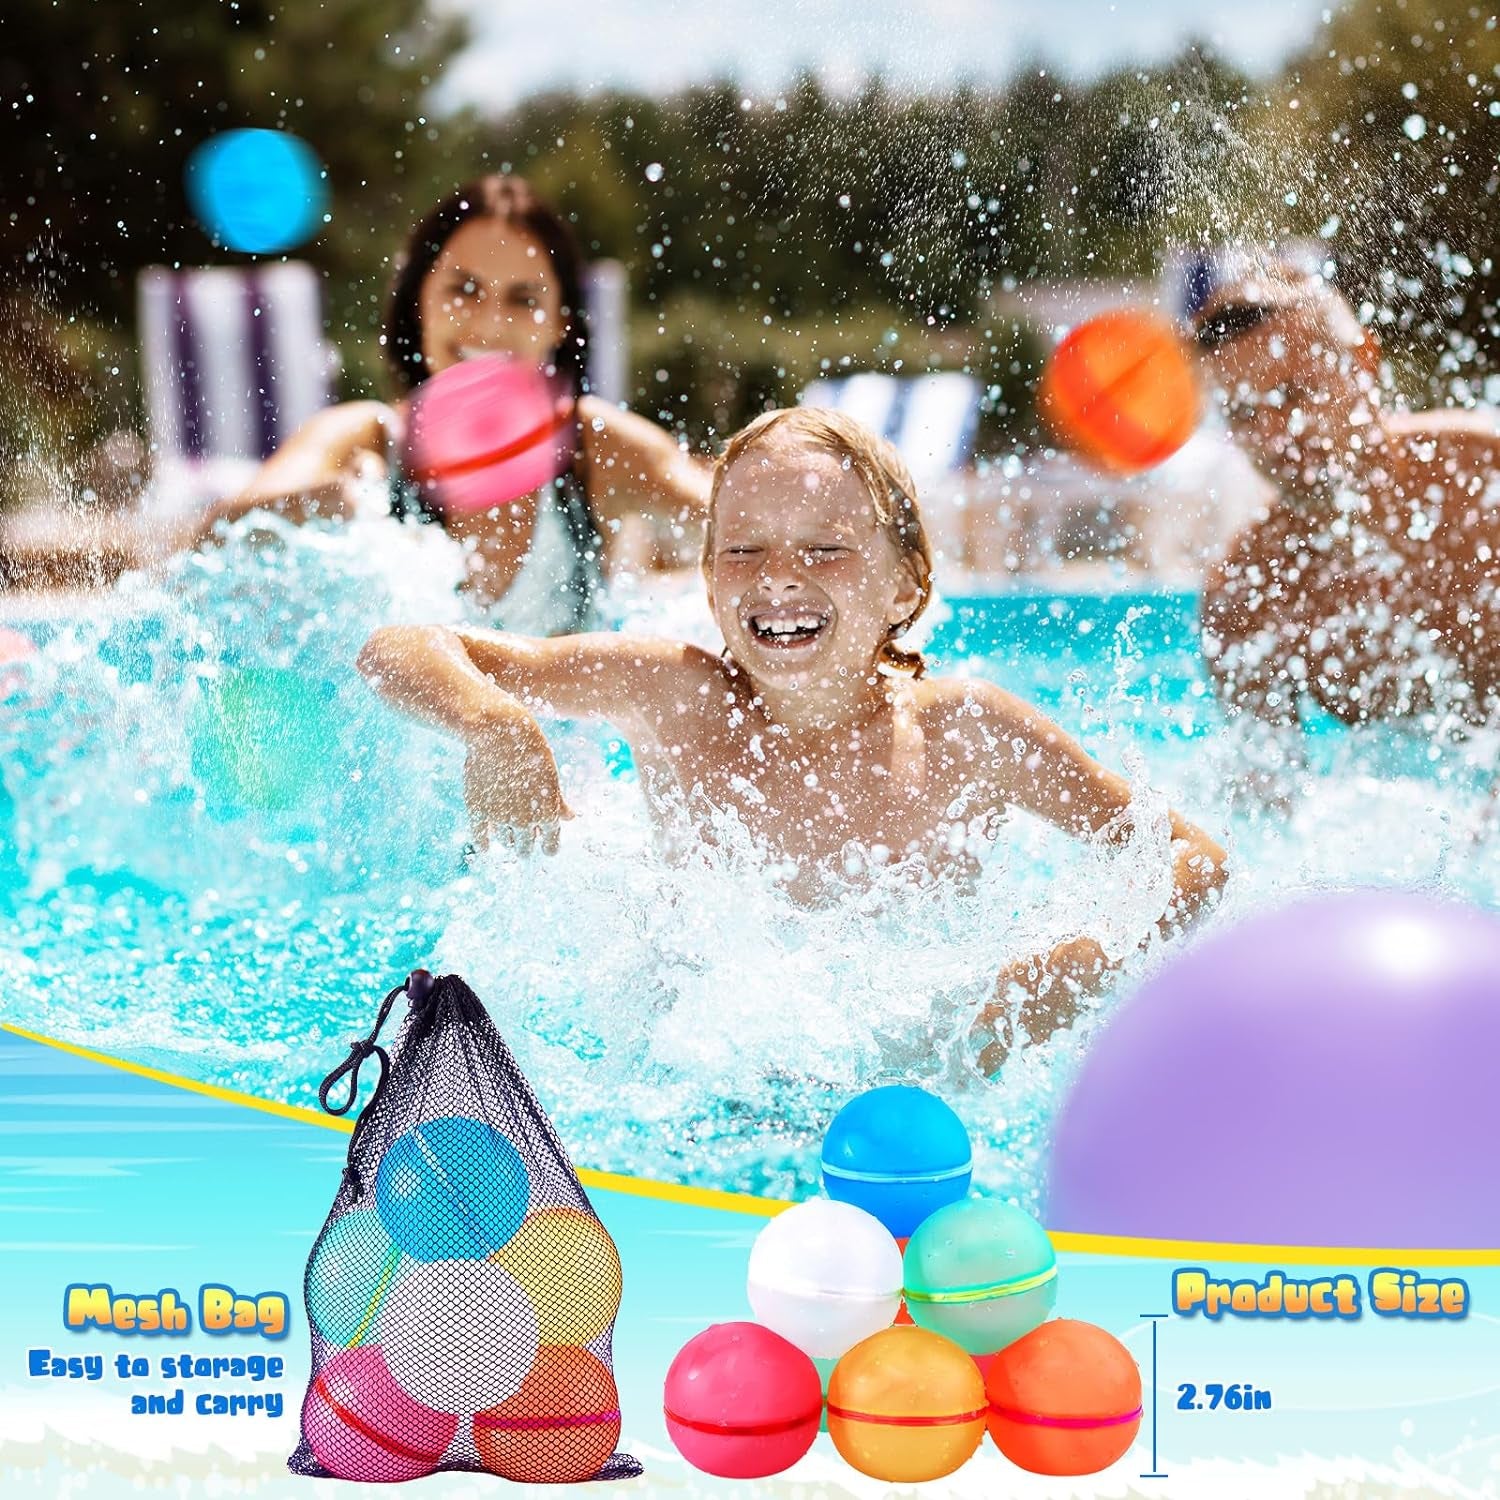 Reusable Water Balloons Quick Fill - 6Pcs Strong Magnetic Silicone Balls Refillable Water Bombs with Mesh Bag, Summer Toys for Swimming Pool Games Beach Backyard for Kids Age 3+ Boys & Girls